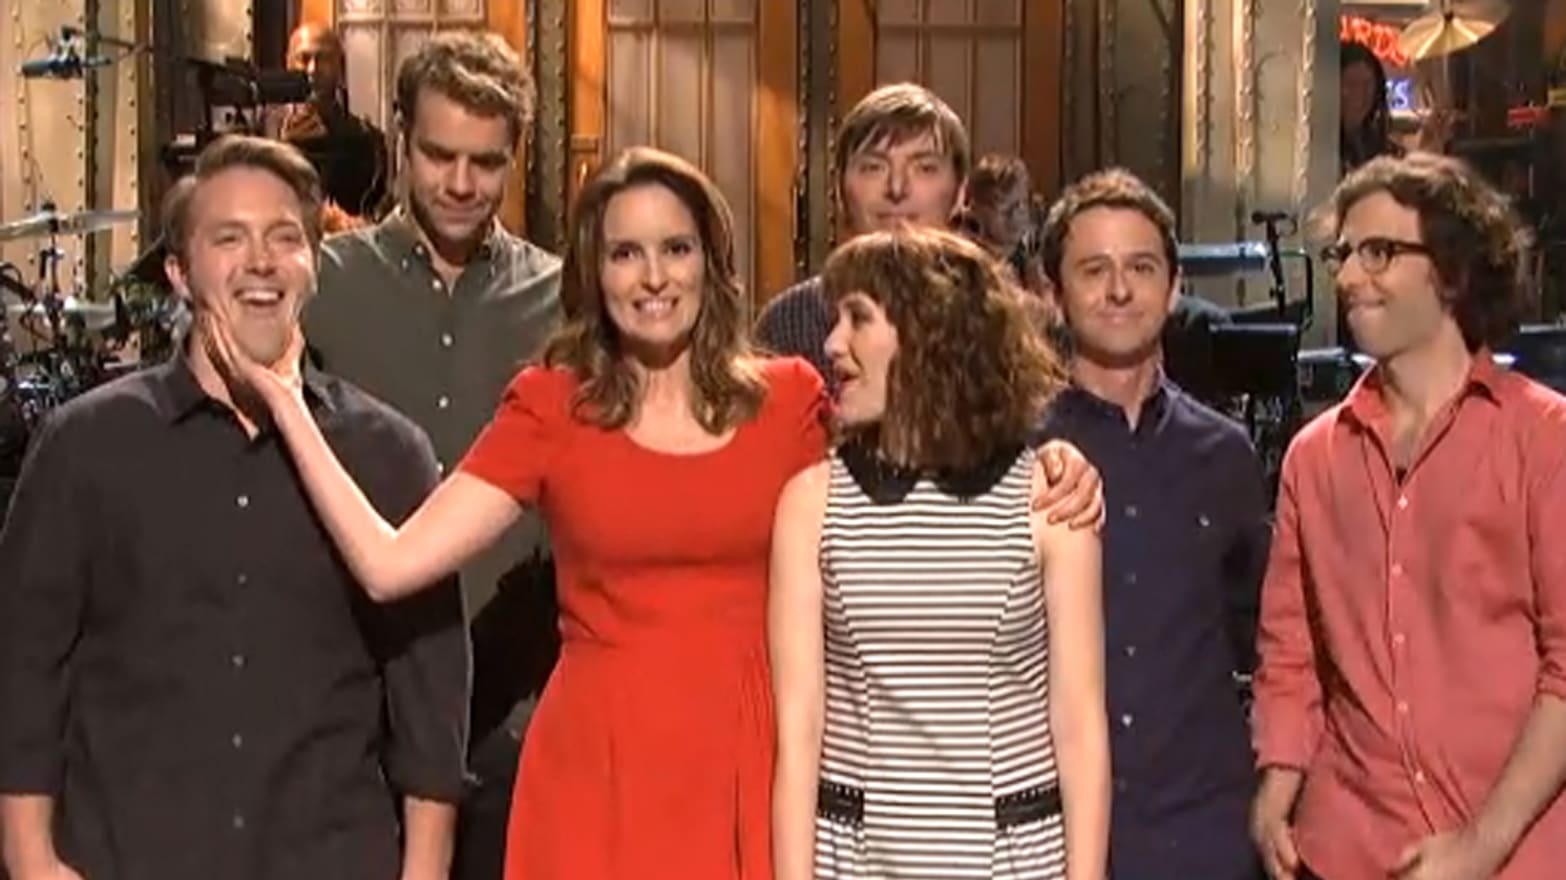 NEWS!! UPDATE!! "Saturday Night Live" (S.N.L.) Has Been CANCELLED Due